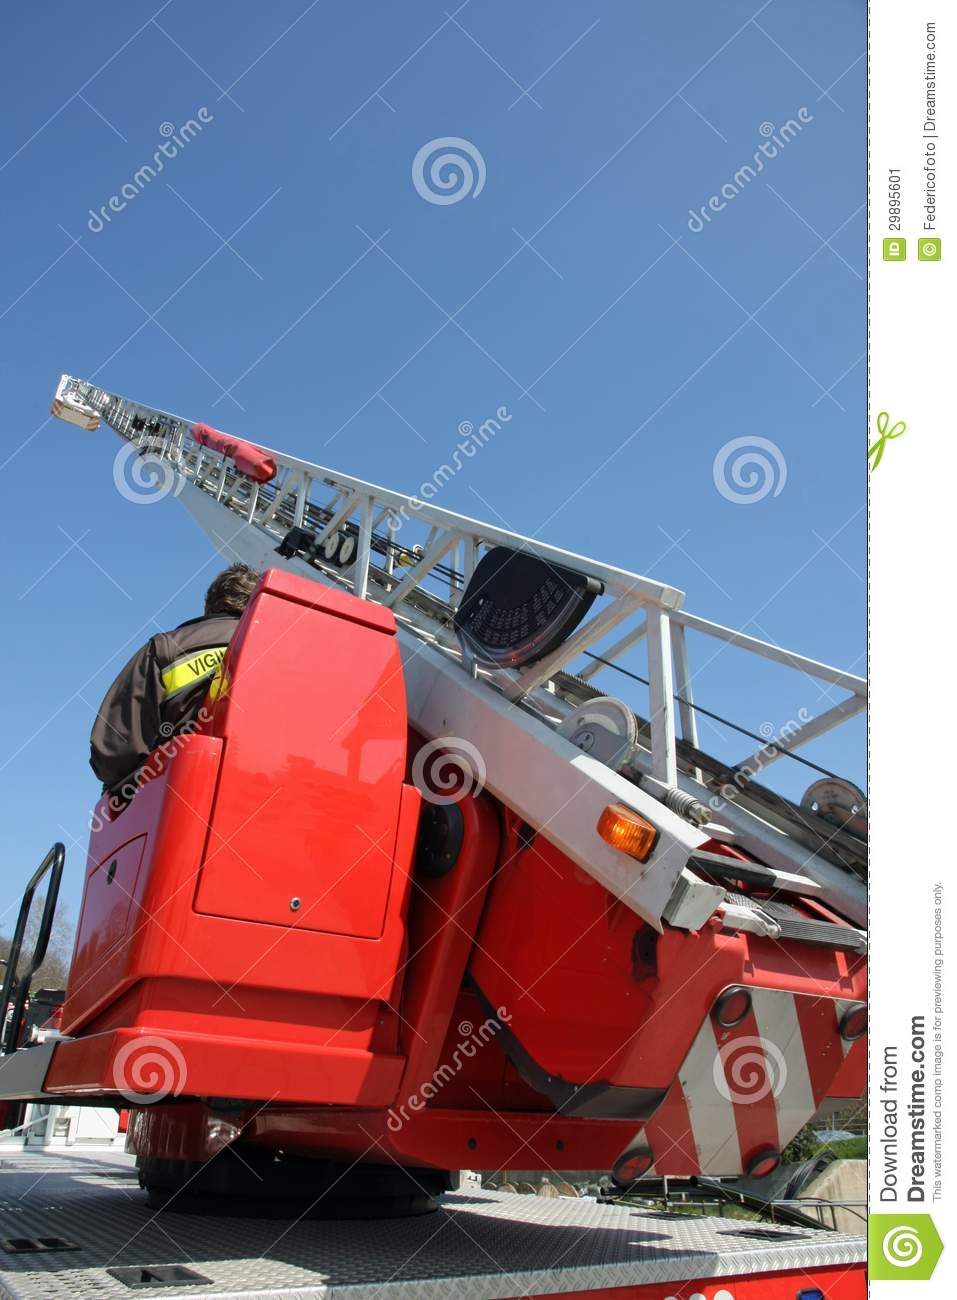 Platform Of A Fire Truck During A Practice Session In The Fireho Stock